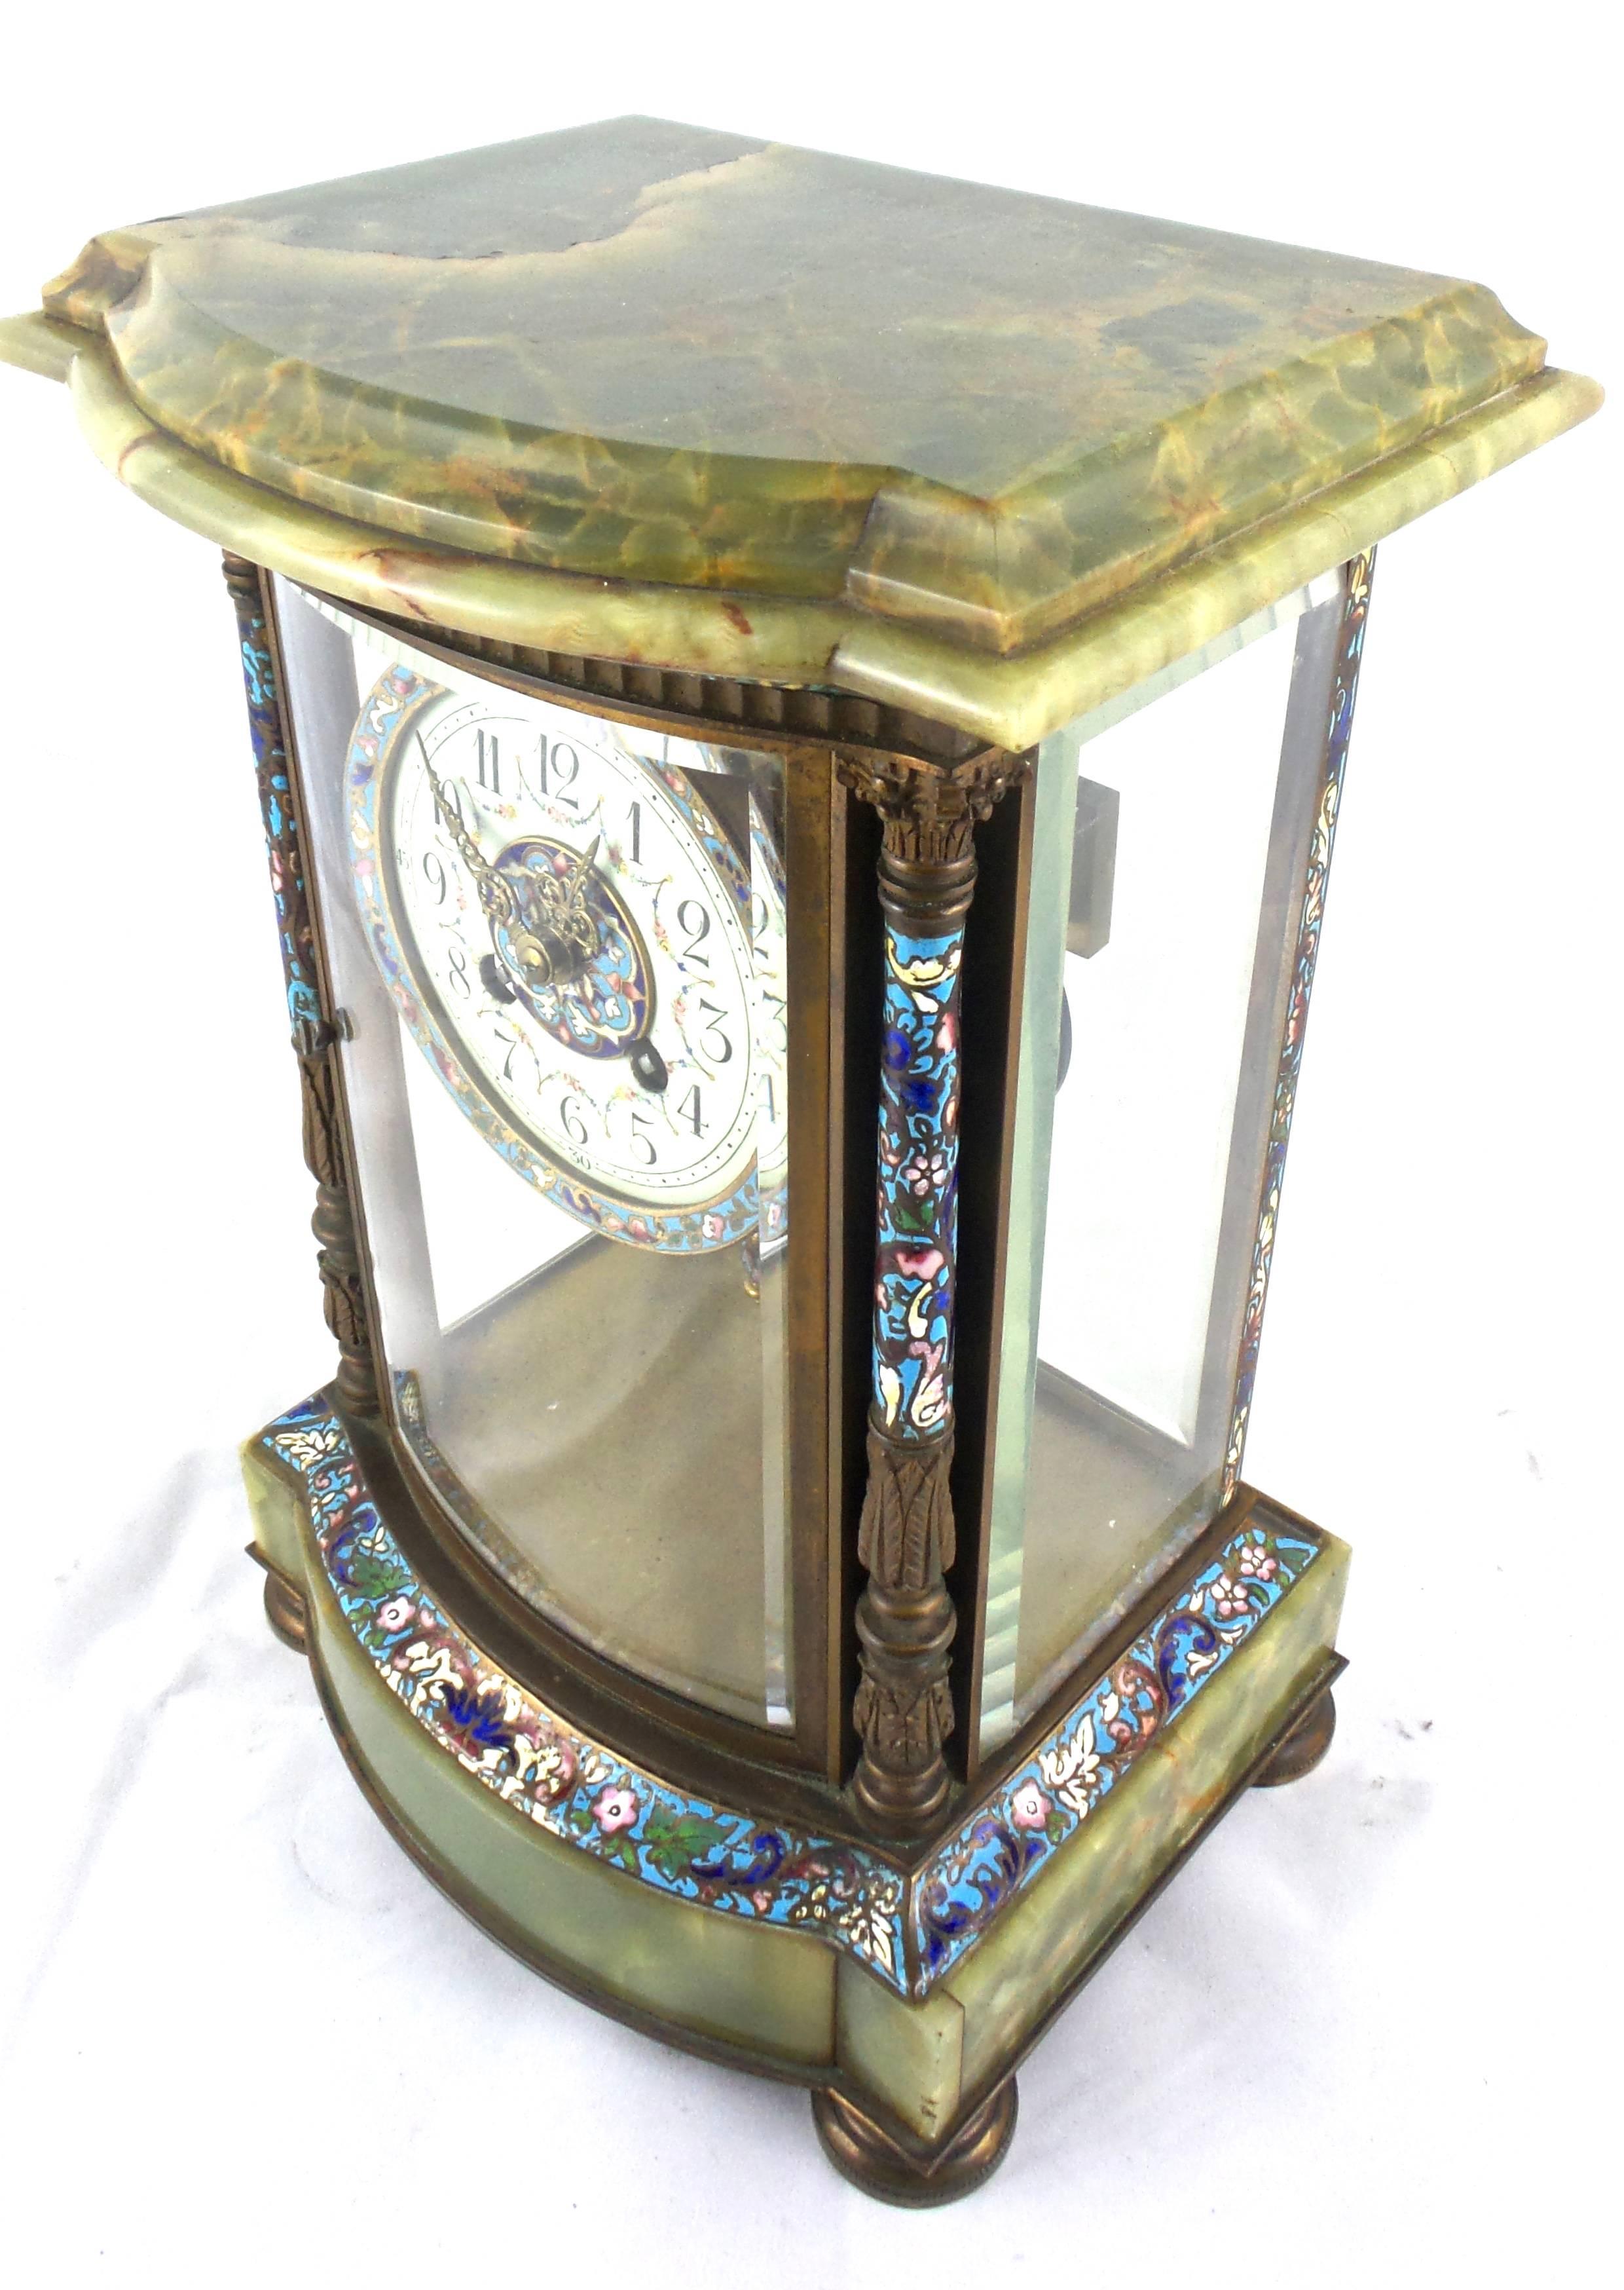 French Provincial French 19th Century Four Glass Crystal Regulator Champleve and Onyx Mantle Clock